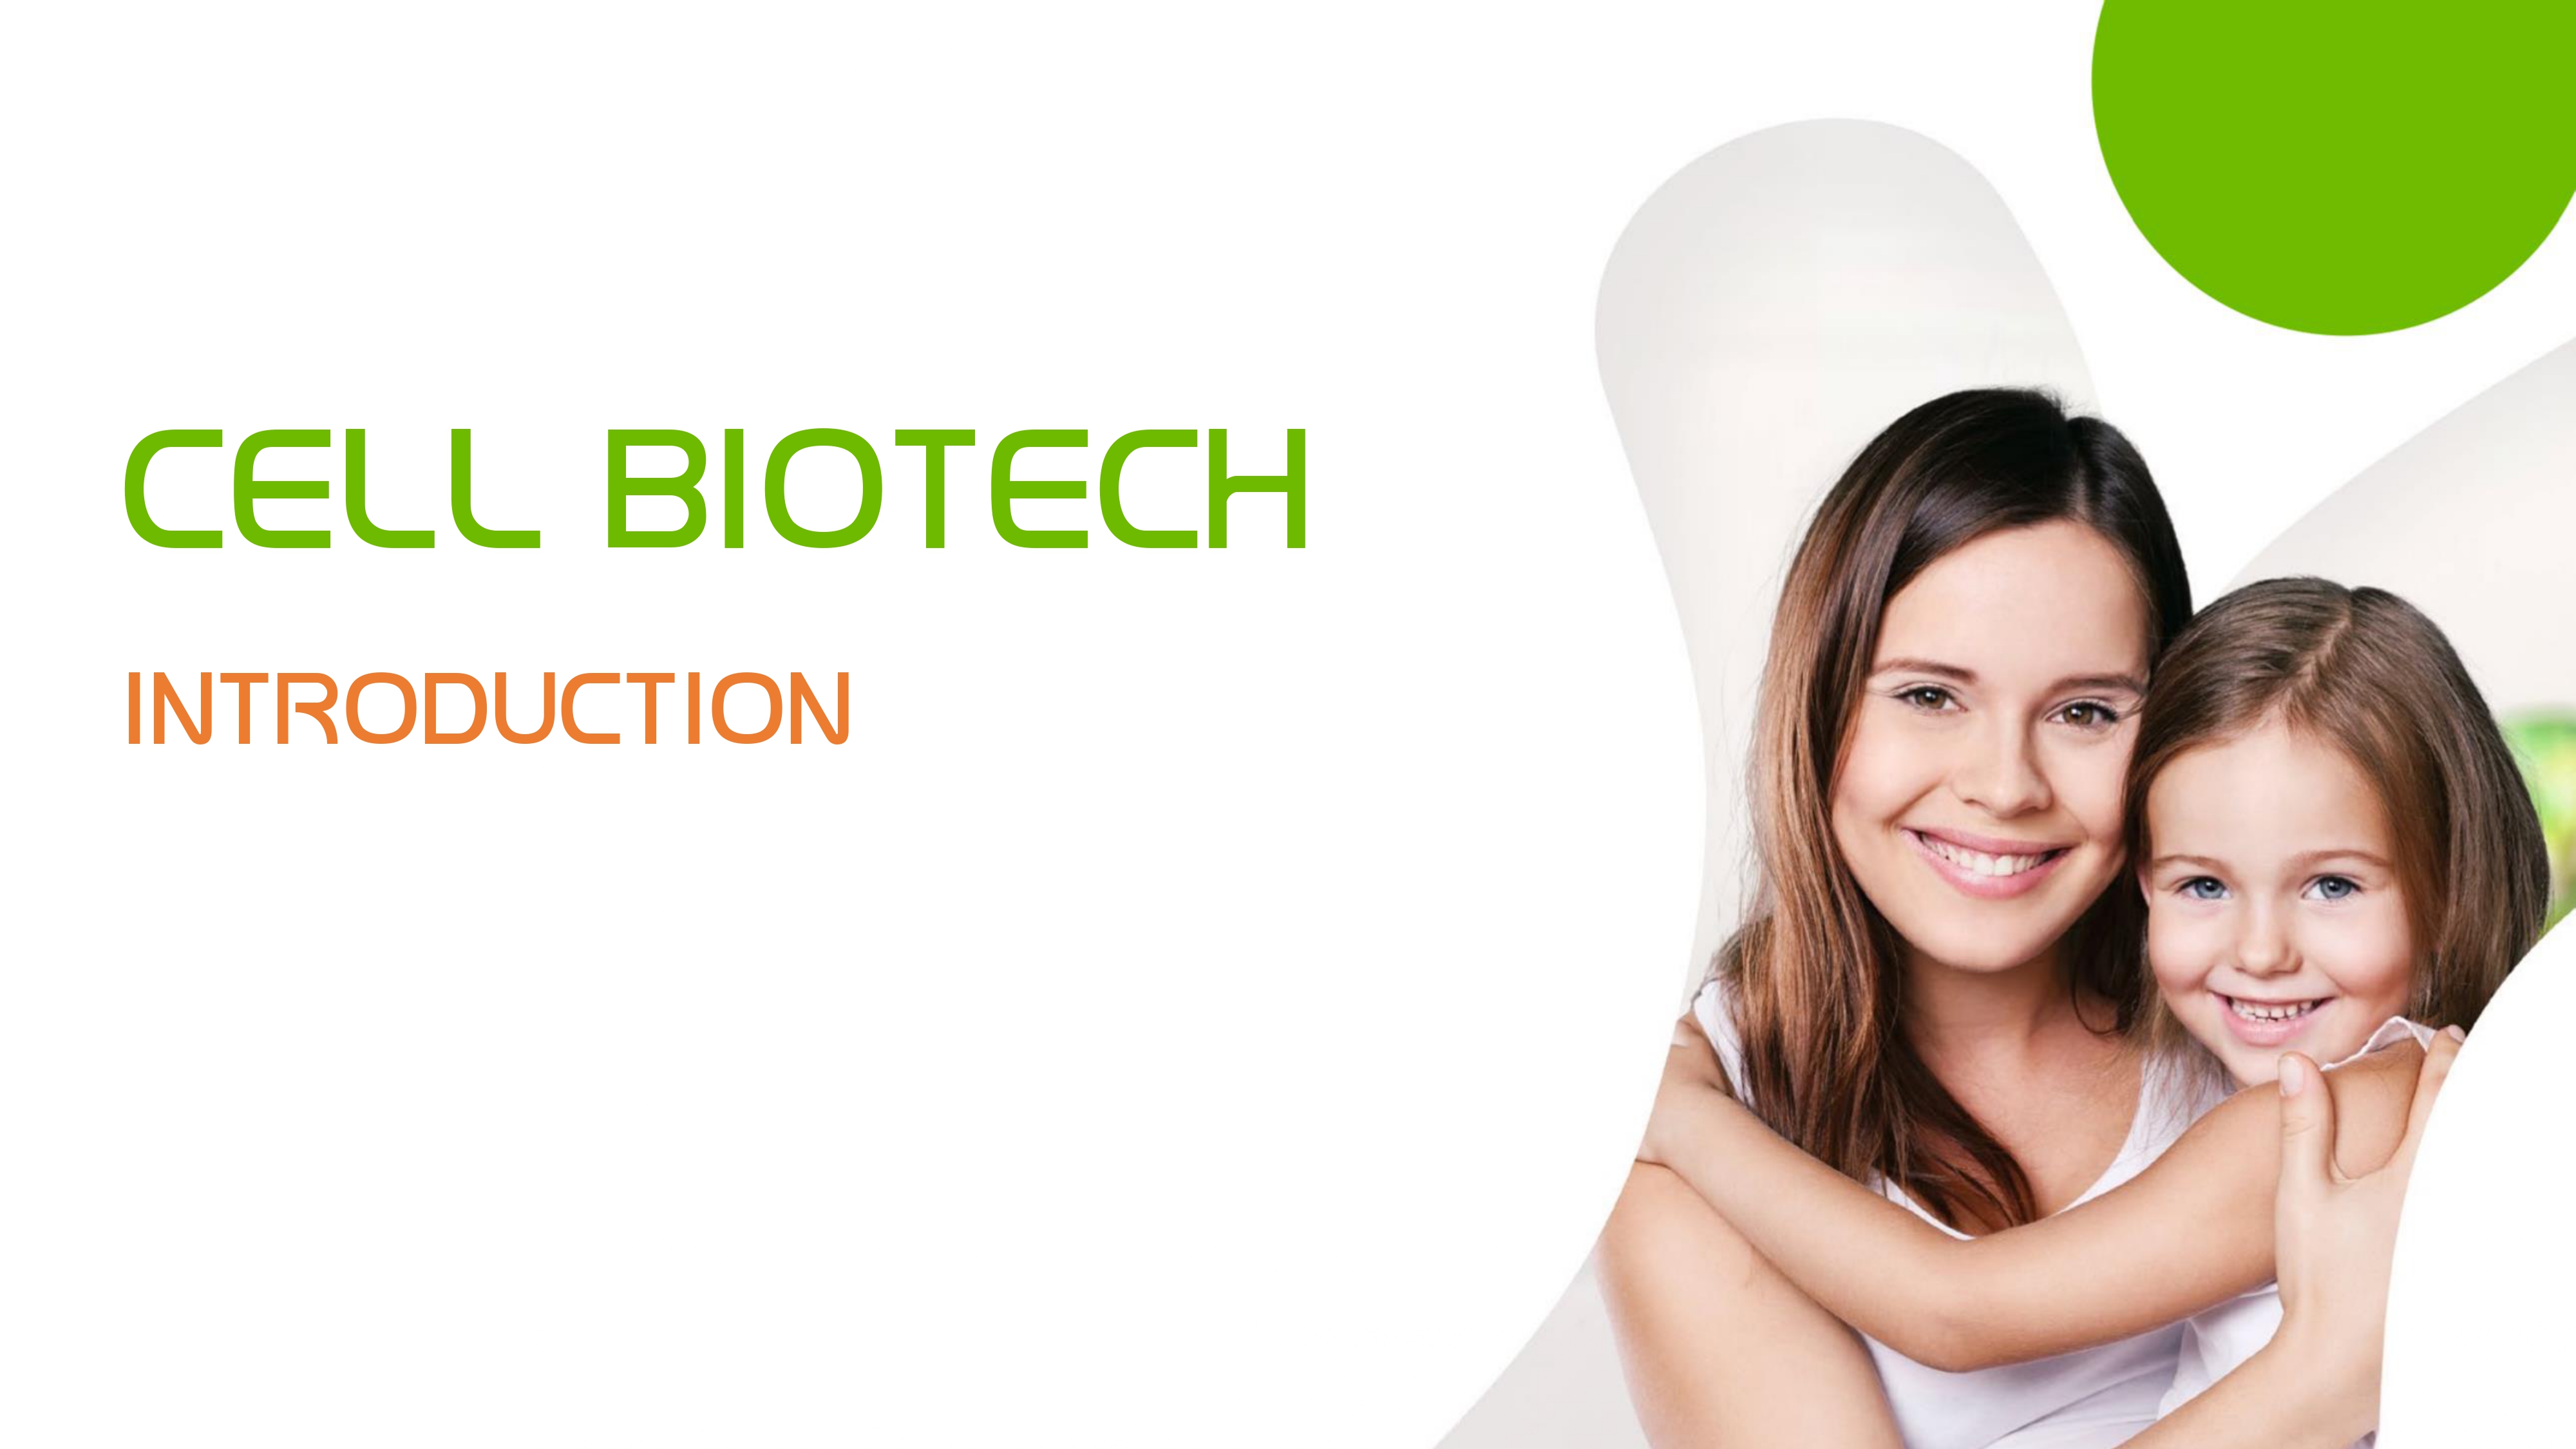 Cell Biotech Company Introduction